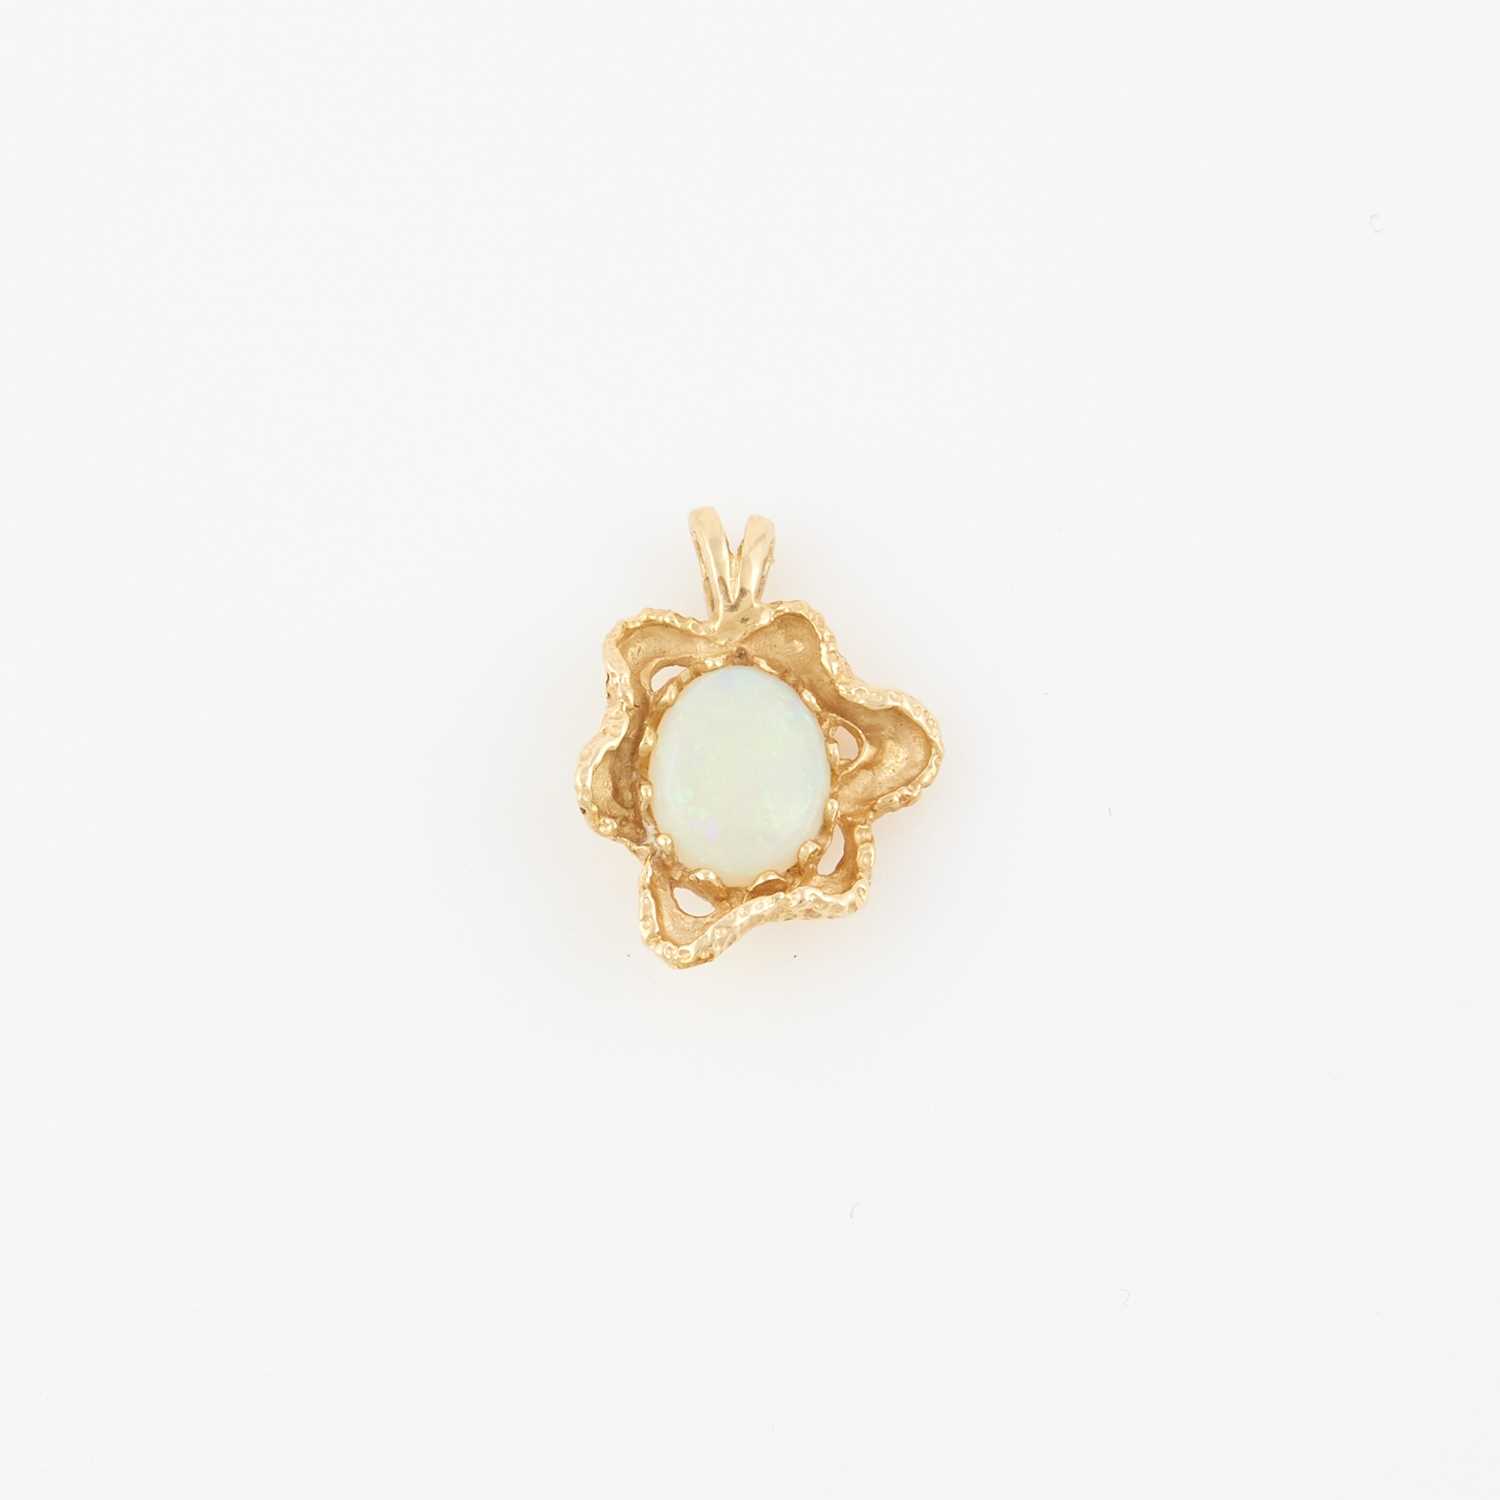 Lot 81 - Gold and Stone Pendant, 14K 1 dwt. all